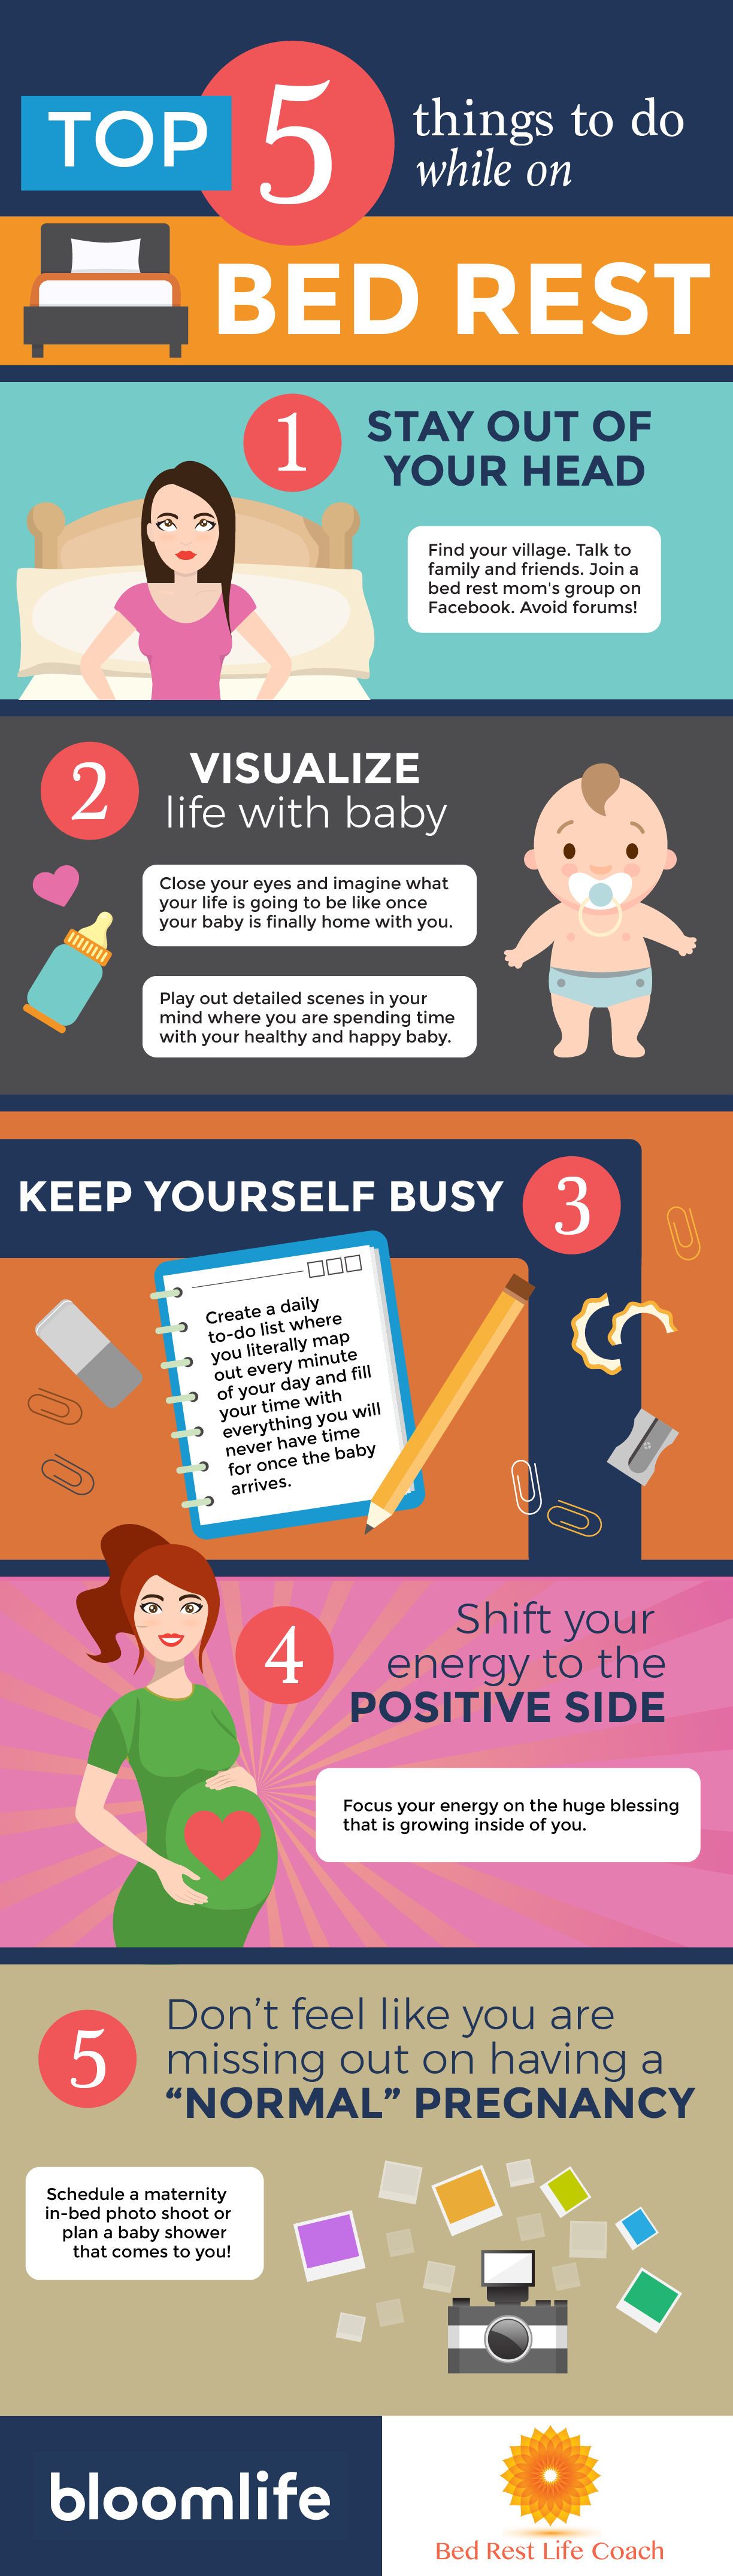 Infographic - Top Five things to do when on bedrest